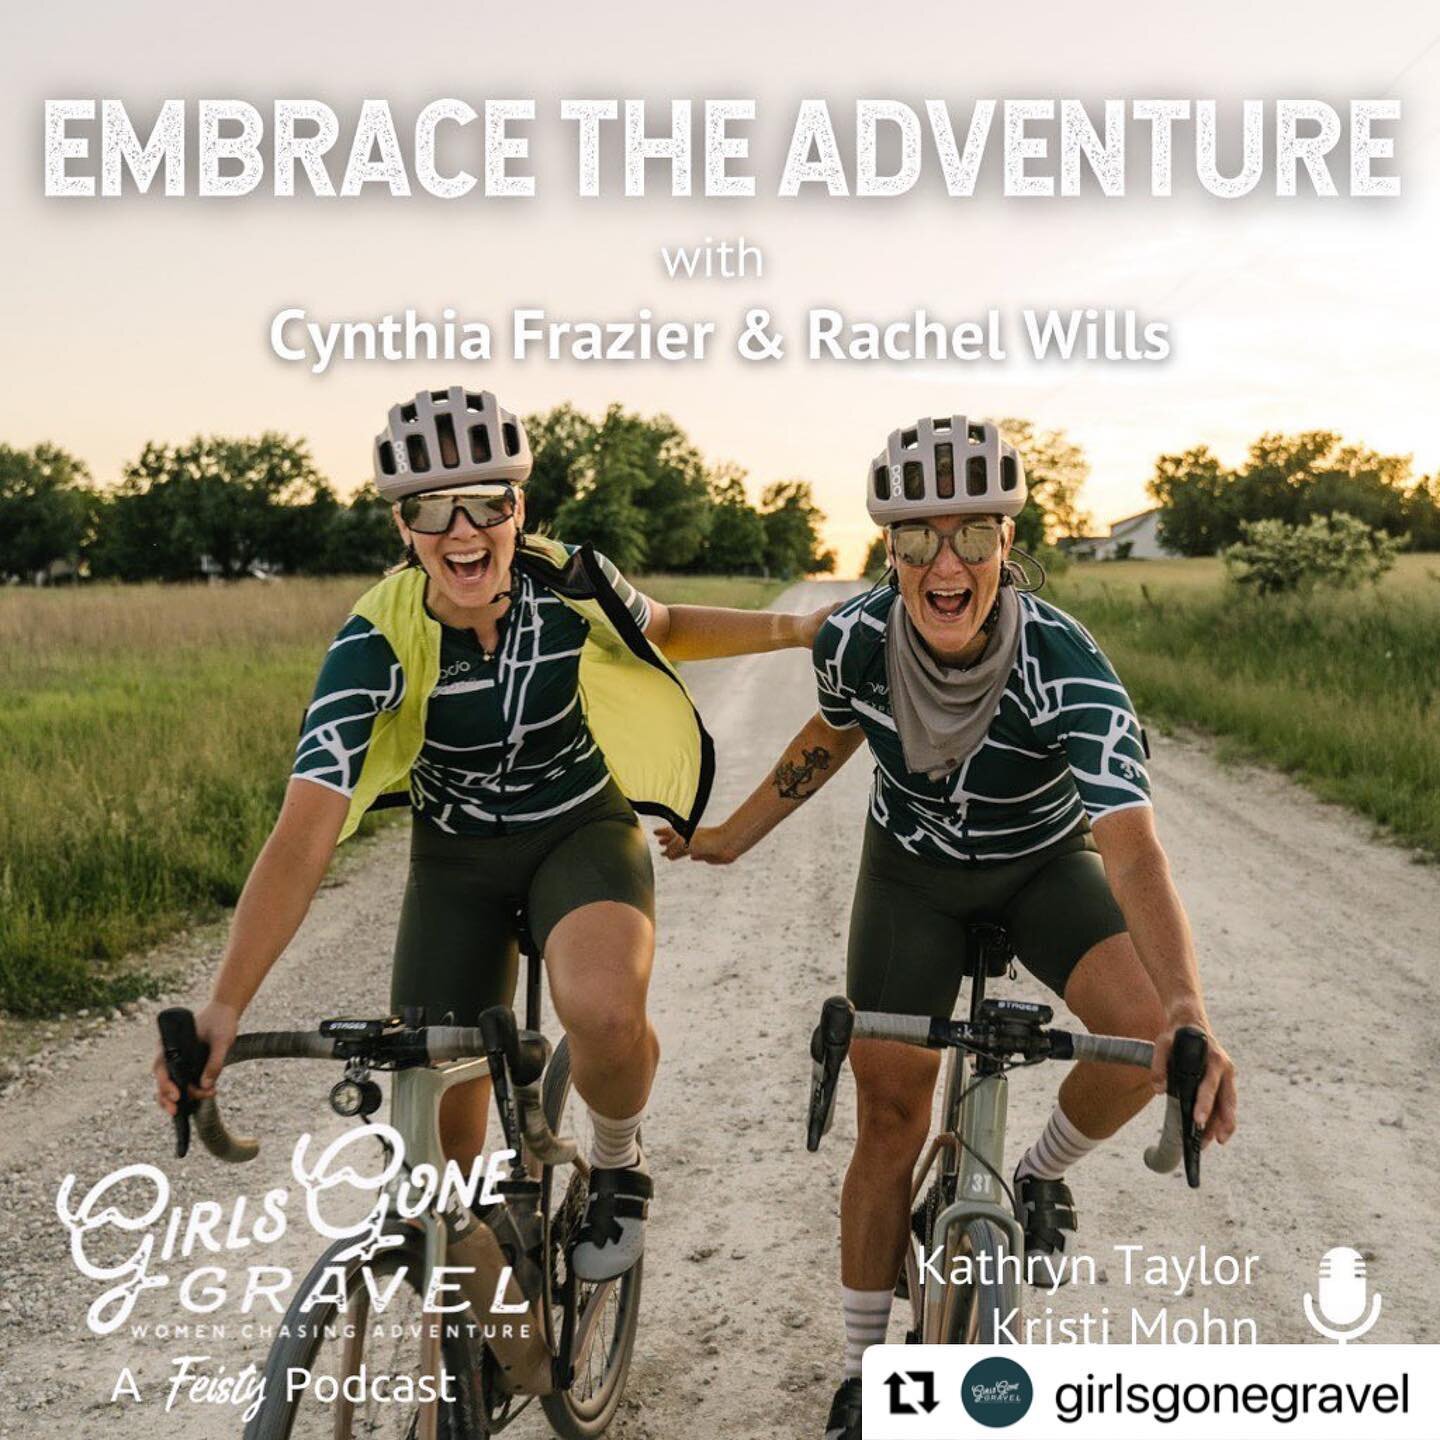 Check us out on the Girls Gone Gravel podcast this week! #Repost @girlsgonegravel 
・・・
🎙This week in the podcast Kristi and Kathryn are catching up with cyclists and BFFs Cynthia Frazier and Rachel Wills. The pair recently raced Unbound XL, and they